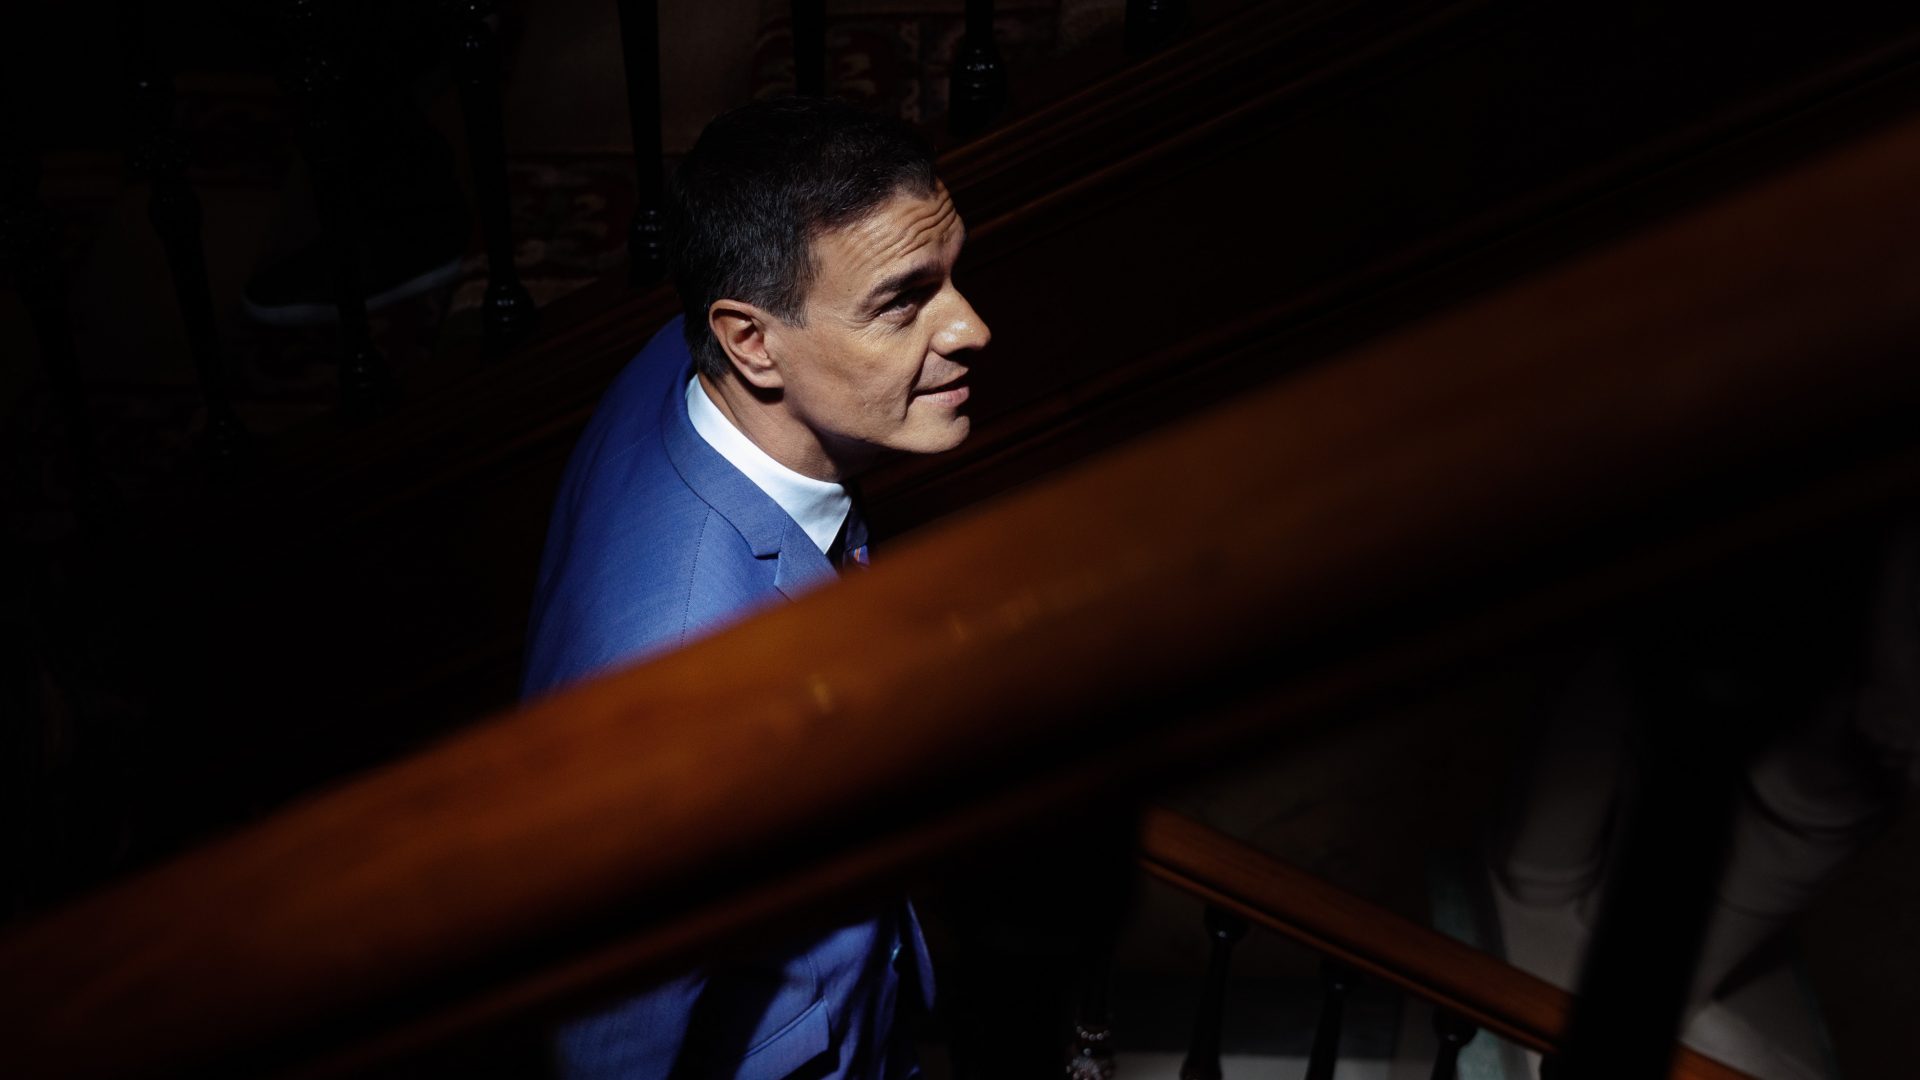 The President of the Government and Secretary General of the PSOE, Pedro Sanchez, leaving a meeting with socialist deputies and senators, in the Congress of Deputies. Photo: Eduardo Parra/Europa Press via Getty Images